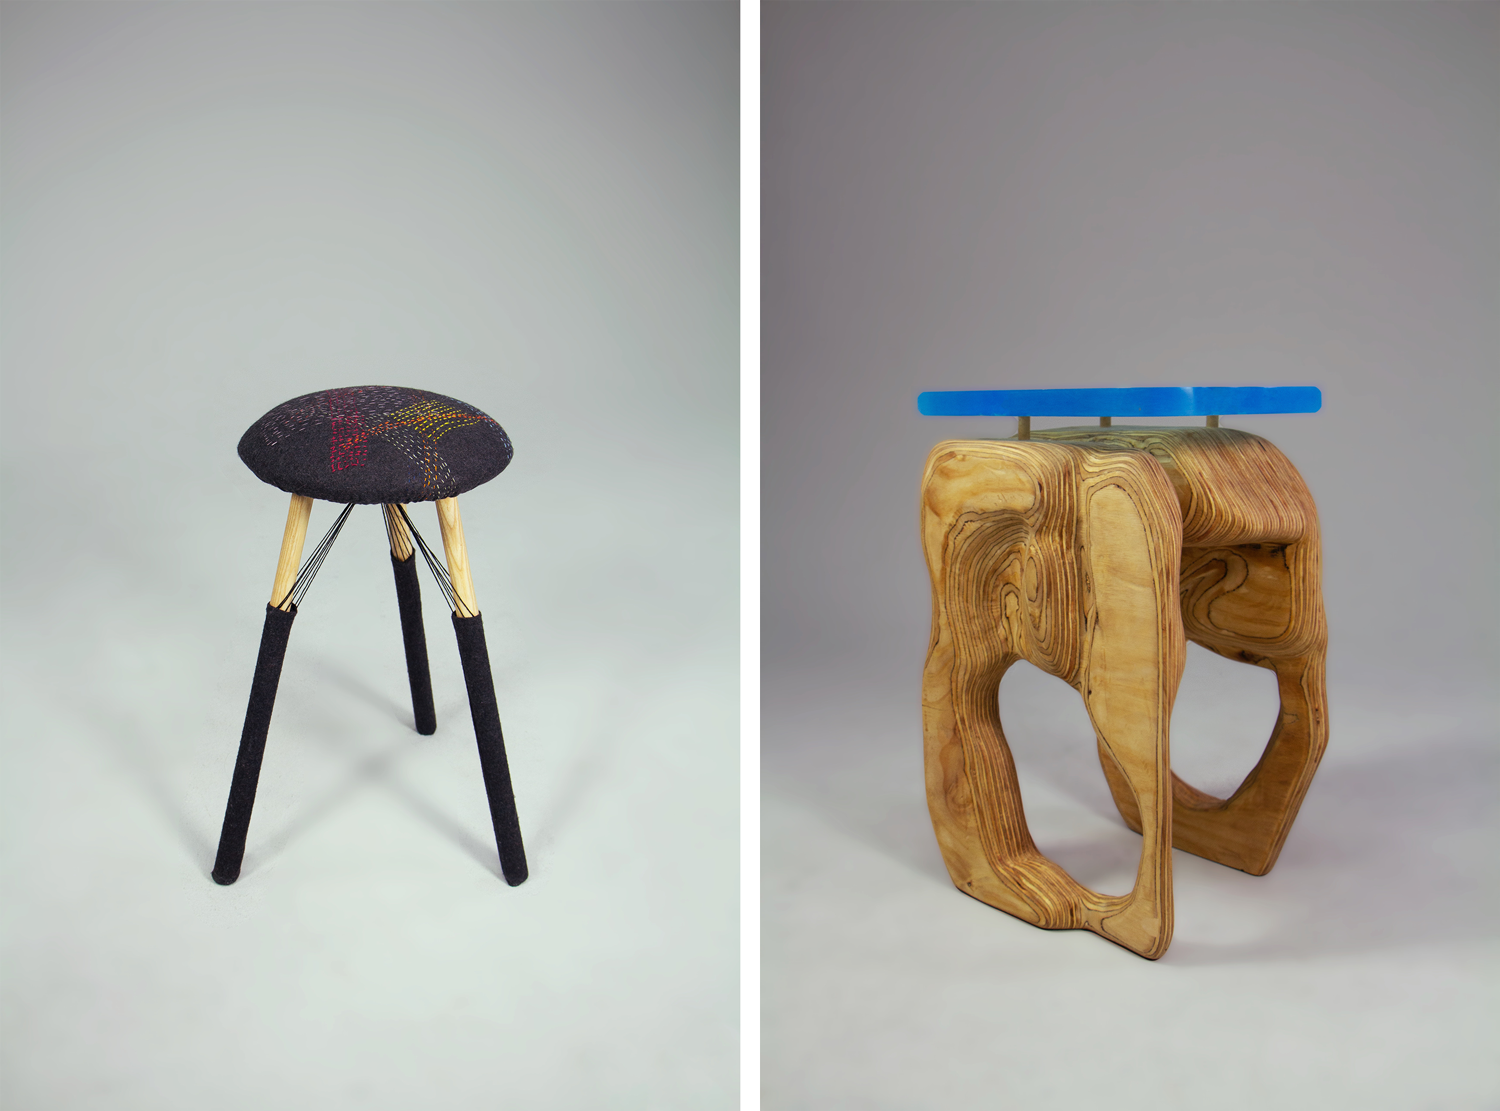 Two chairs by Lydia: left, stool with embroidered seat; right, wood abstract stool with clear blue seat